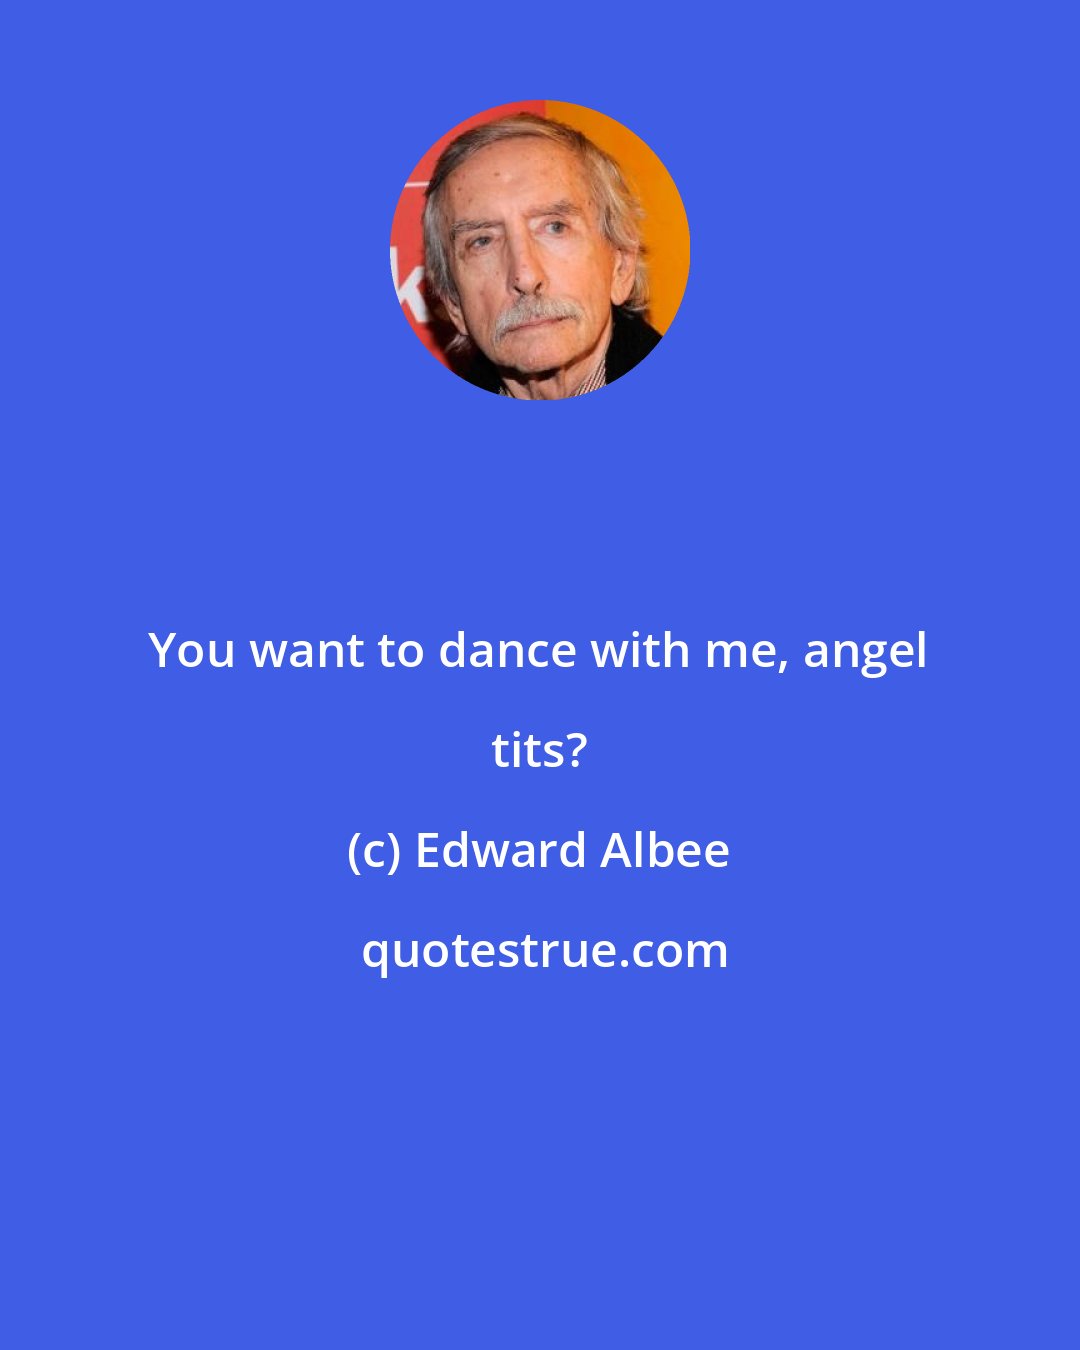 Edward Albee: You want to dance with me, angel tits?